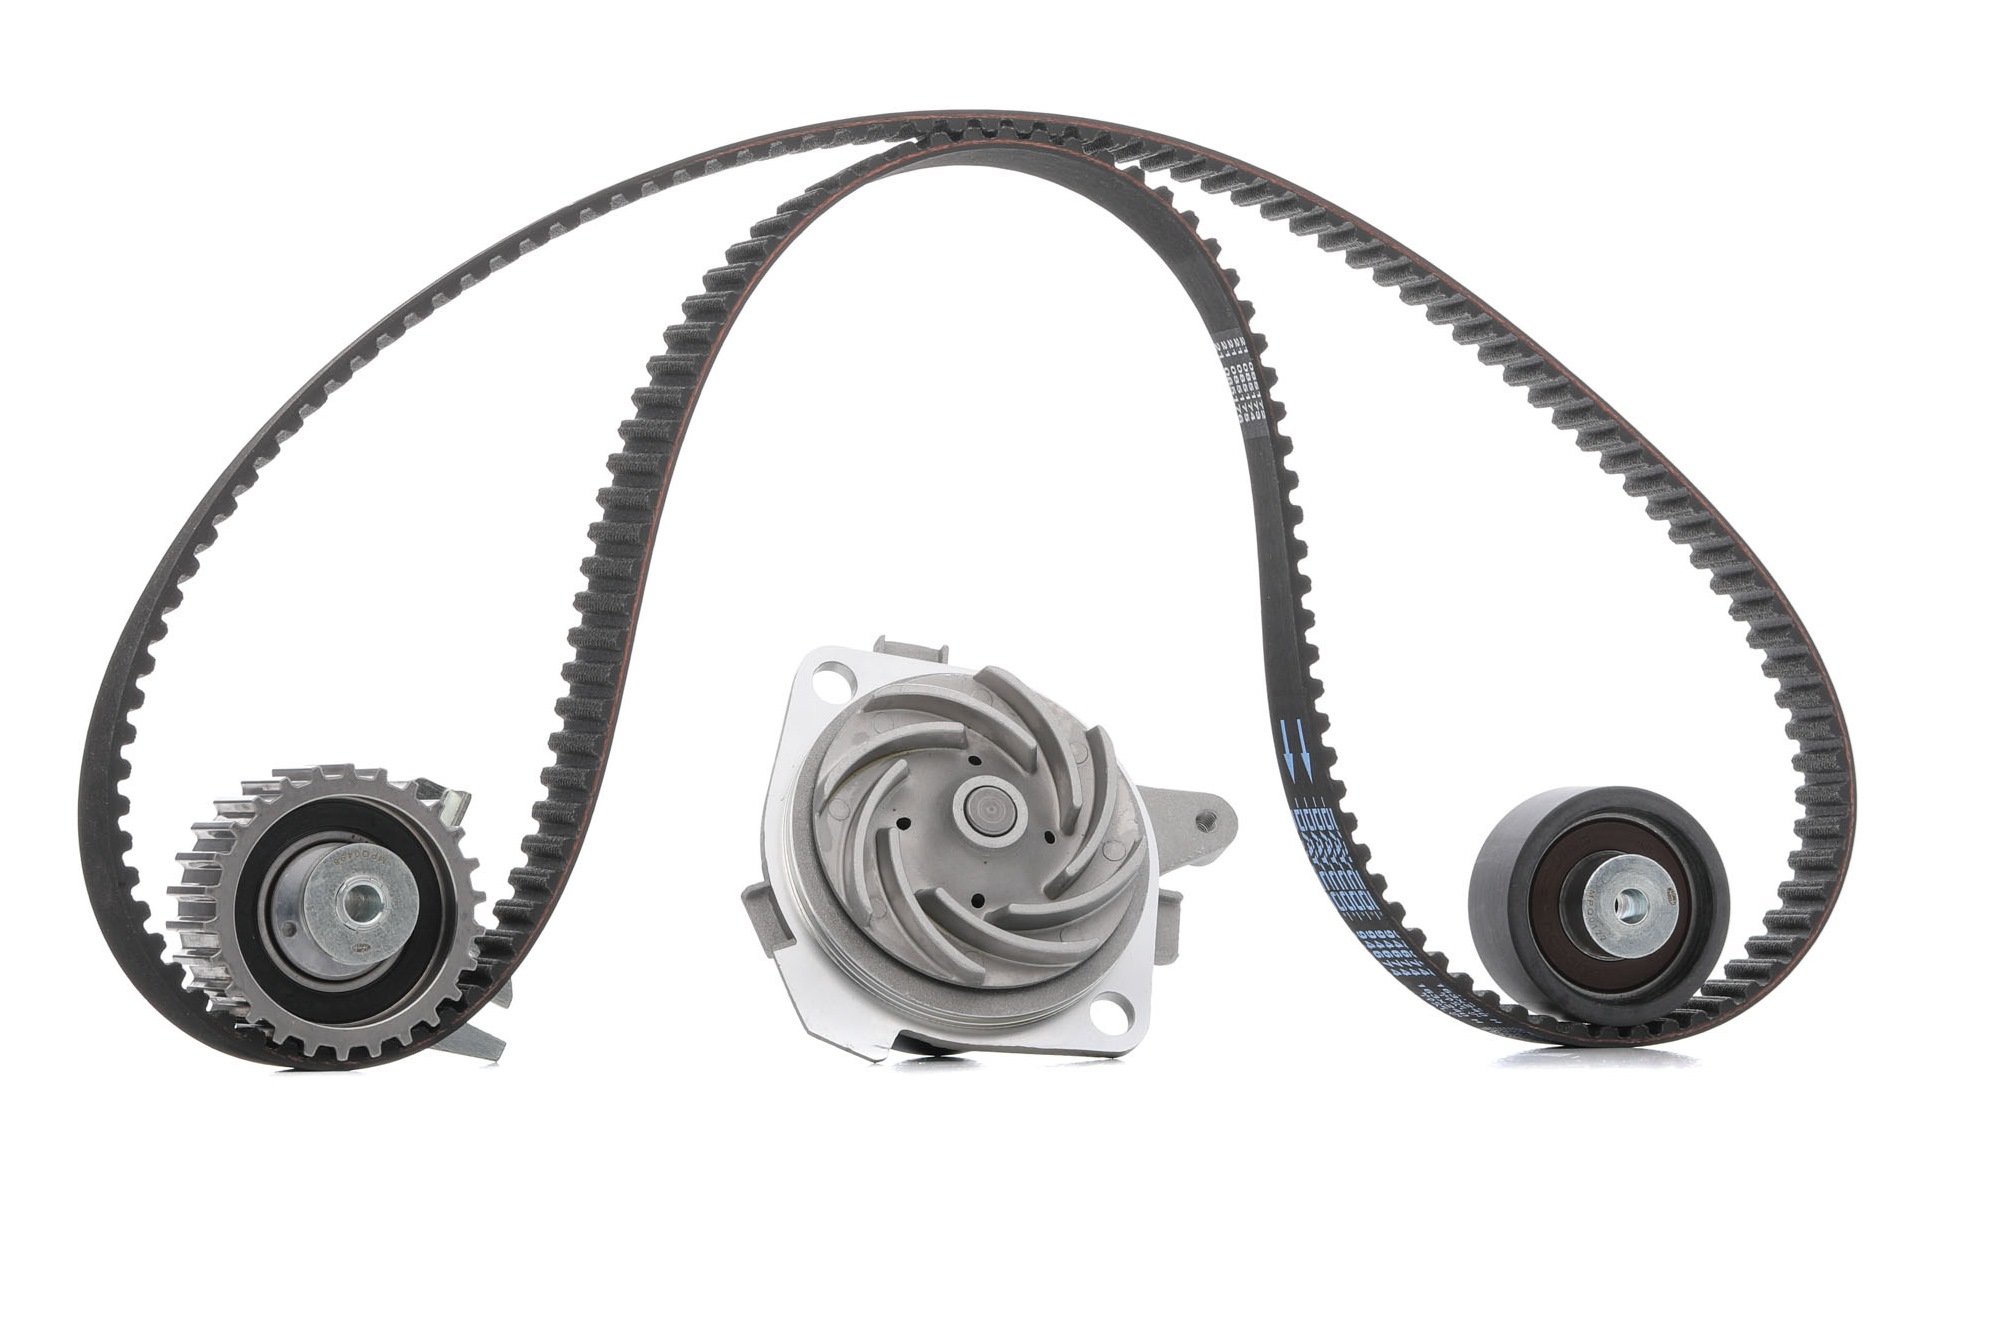 MAGNETI MARELLI 132011160054 Water pump and timing belt kit Number of Teeth: 163 L: 1304 mm, Width: 24 mm